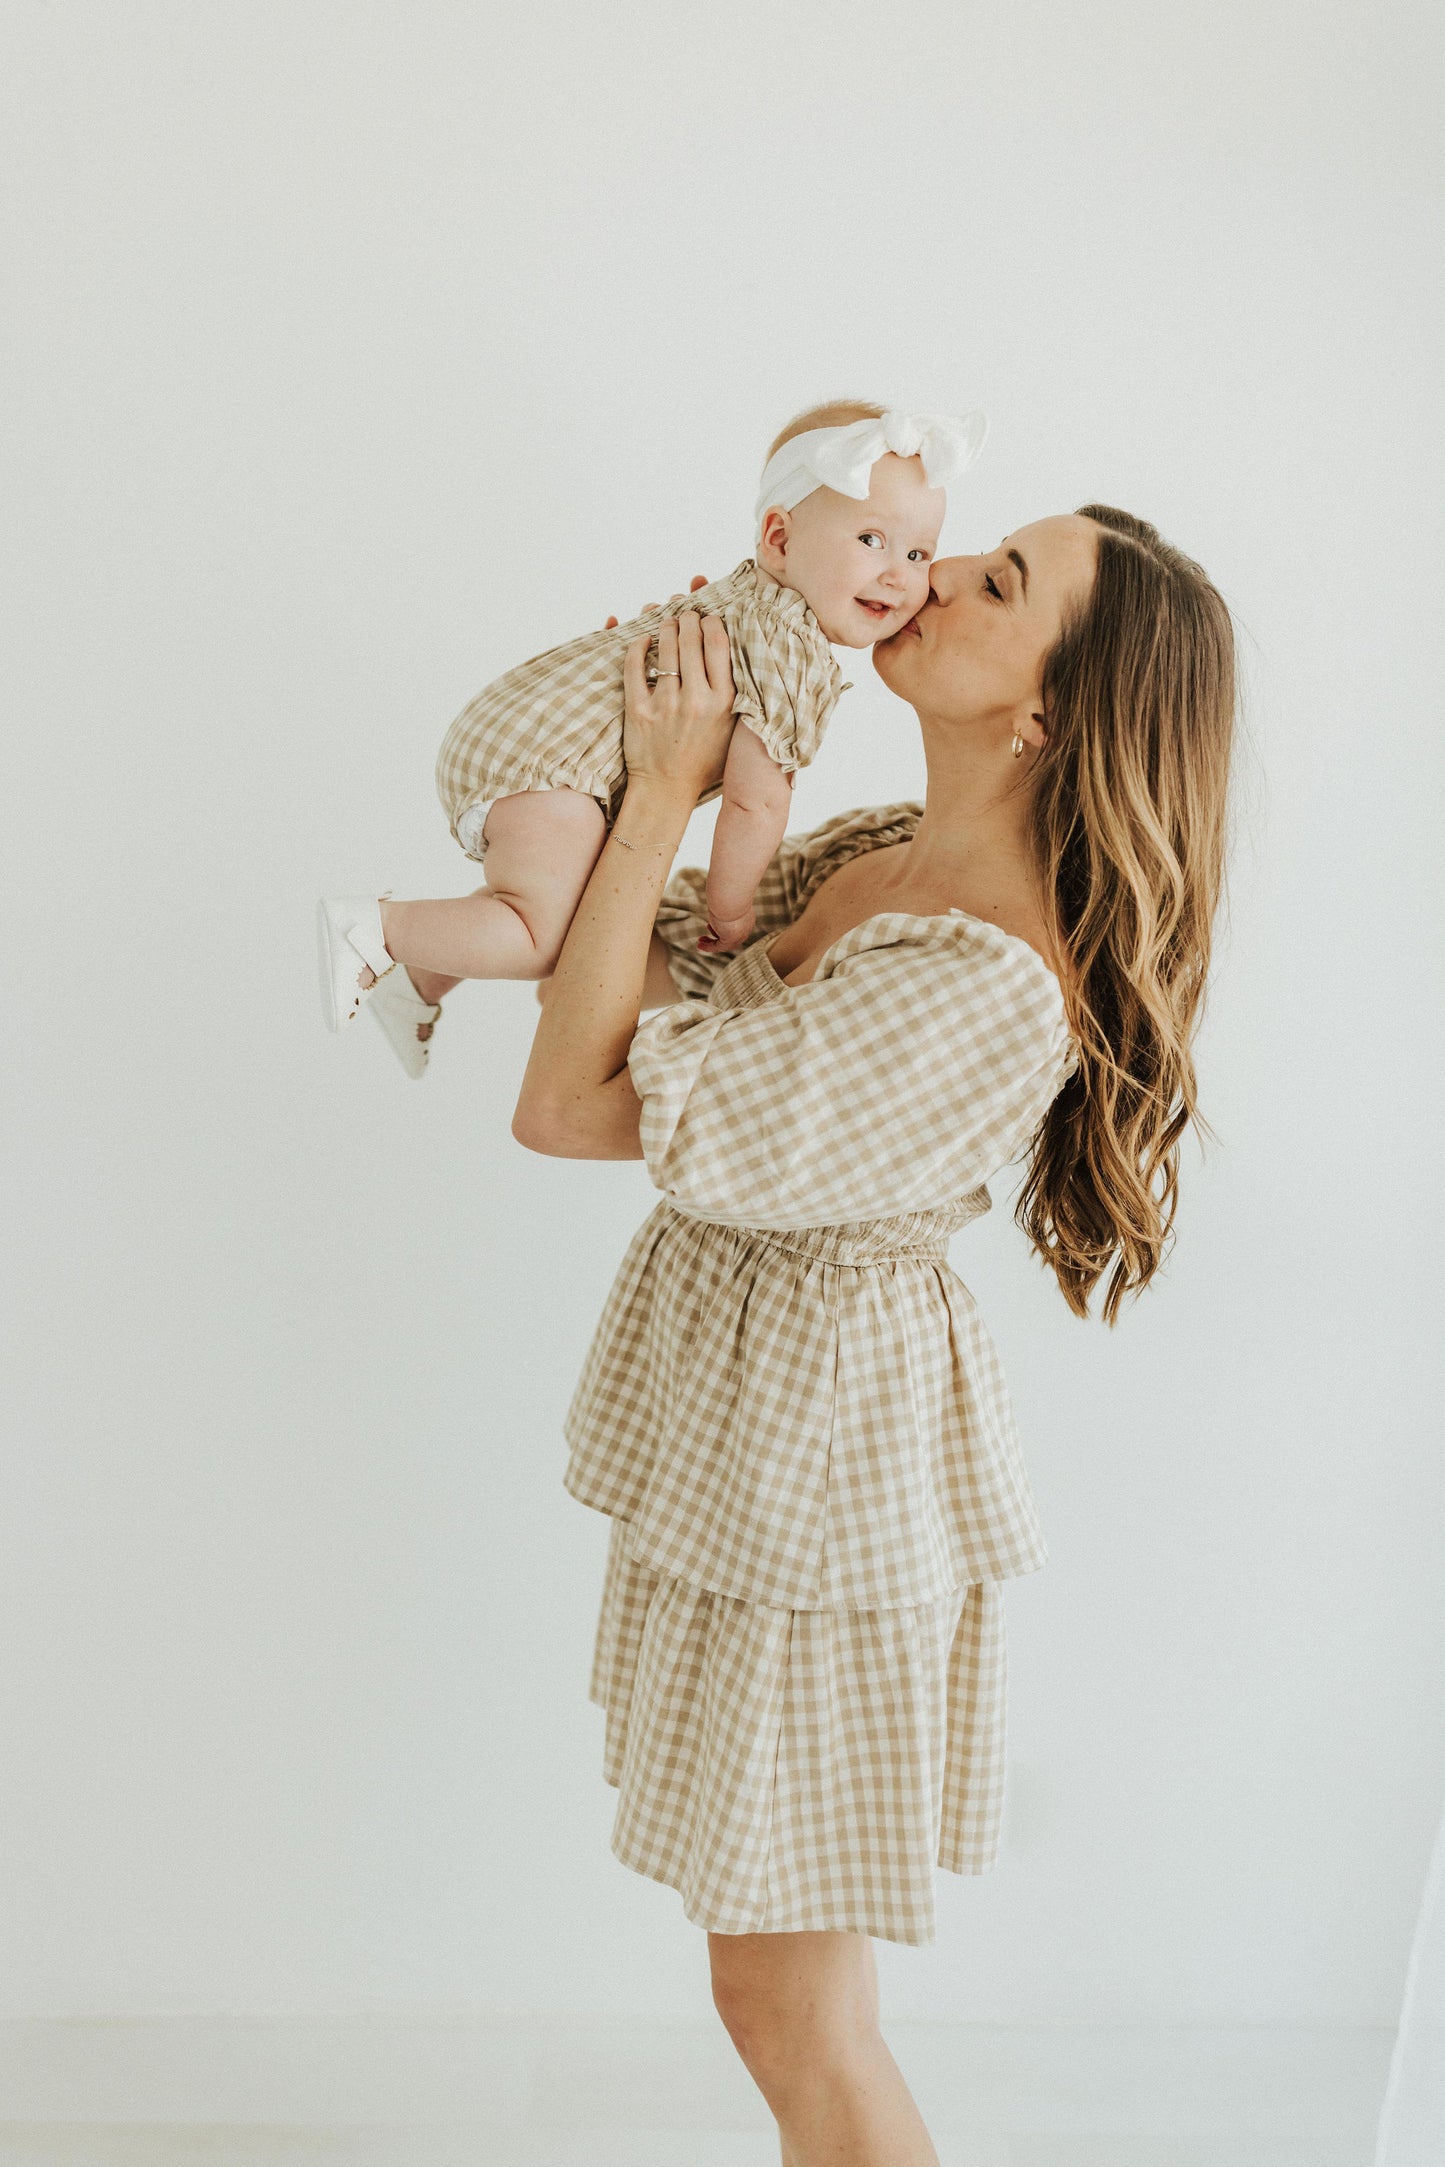 Mommy and me clothing, women’s fashion, children’s fashion, children’s clothing, matching outfits, matching dresses, mommy and me matching outfits, girl mom, boy mom, family outfits, matching family clothing, woman owned business, Mommy&Me matching styles 